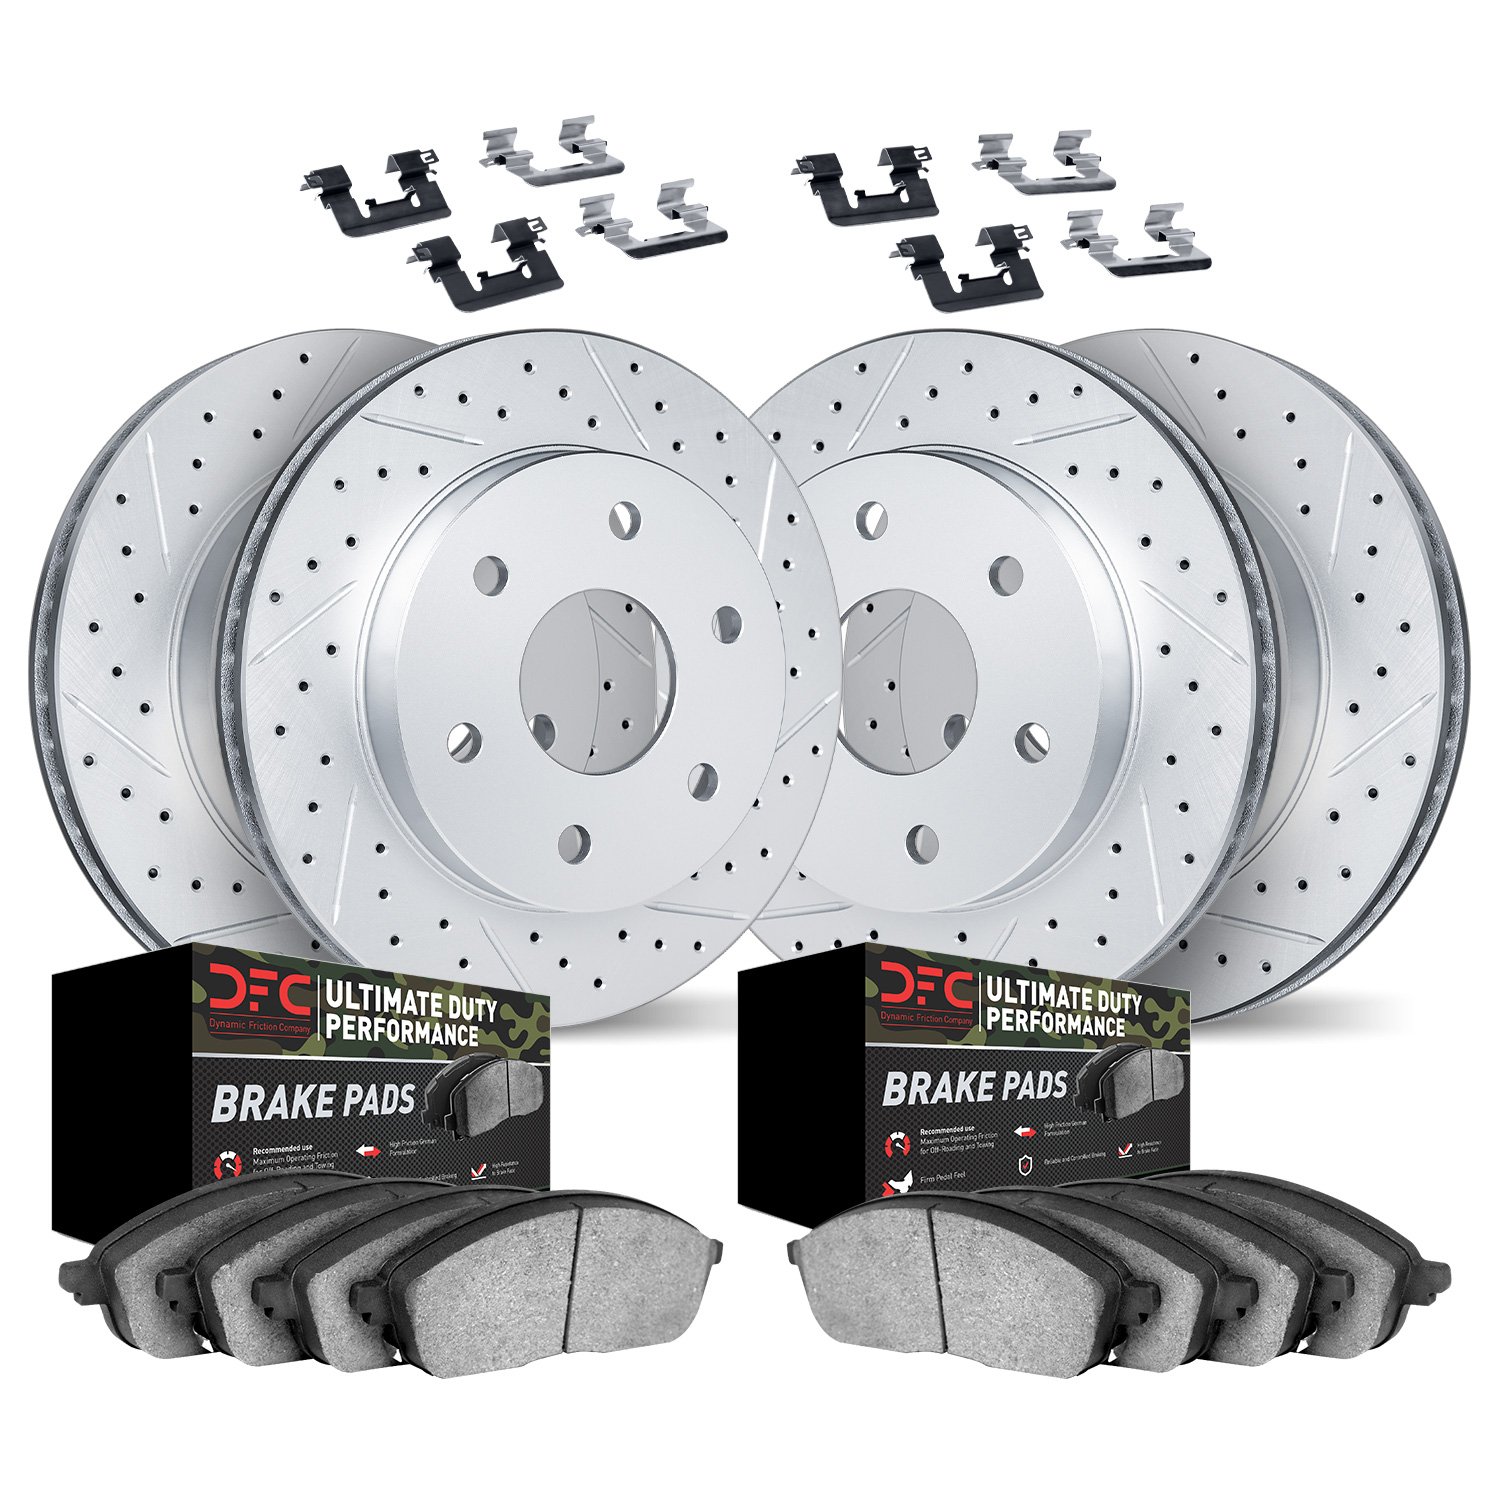 2414-76008 Geoperformance Drilled/Slotted Brake Rotors with Ultimate-Duty Brake Pads Kit & Hardware, Fits Select Lexus/Toyota/Sc